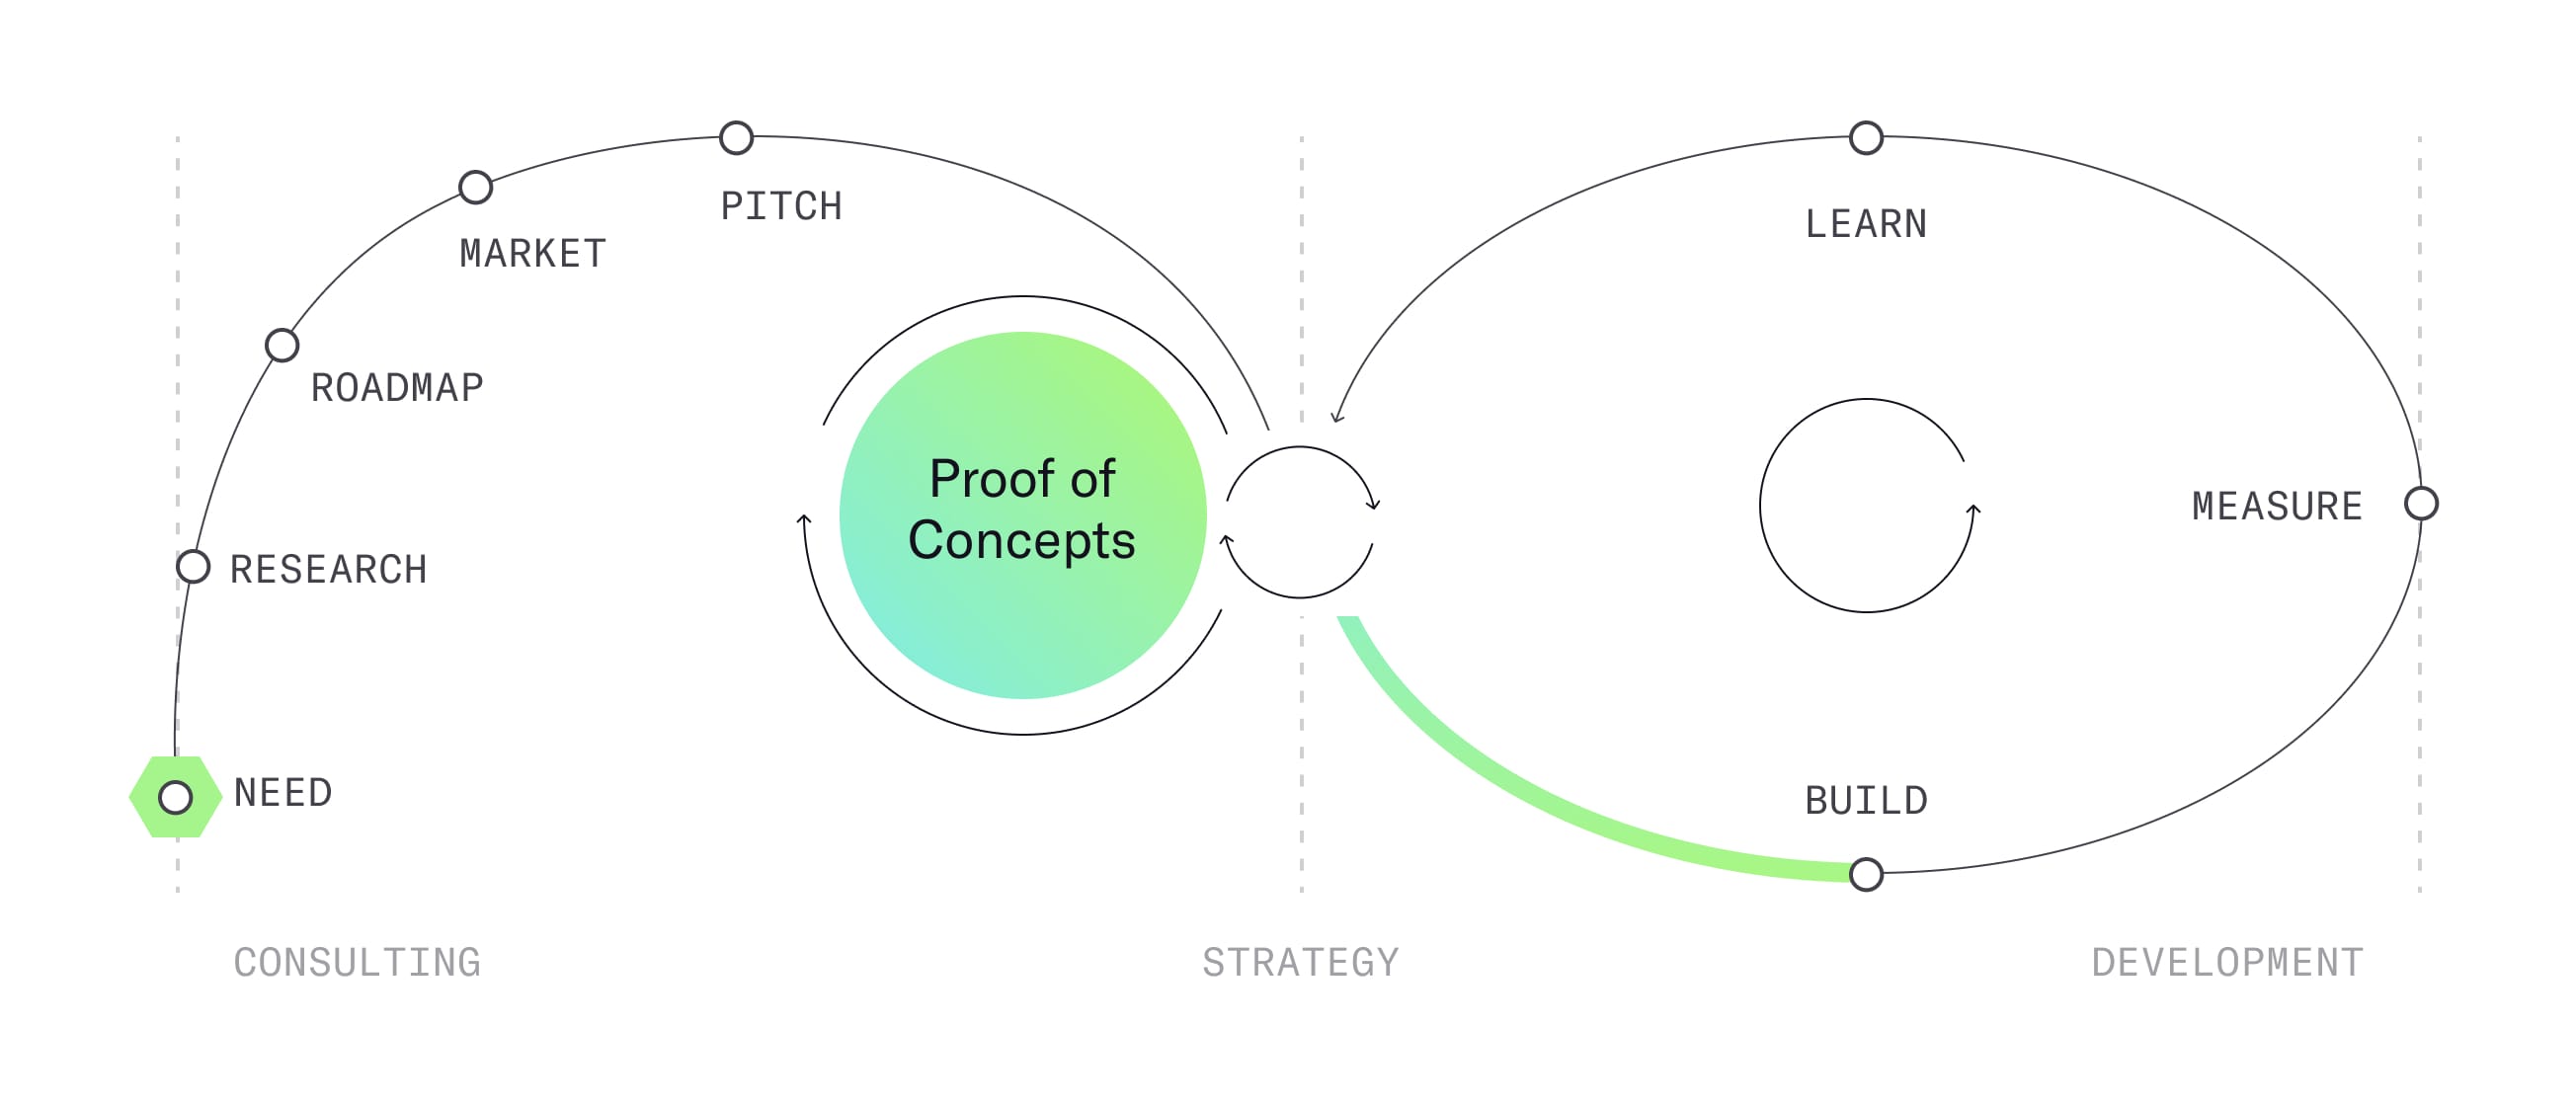 MojoTech's fintech consulting and development process diagram.